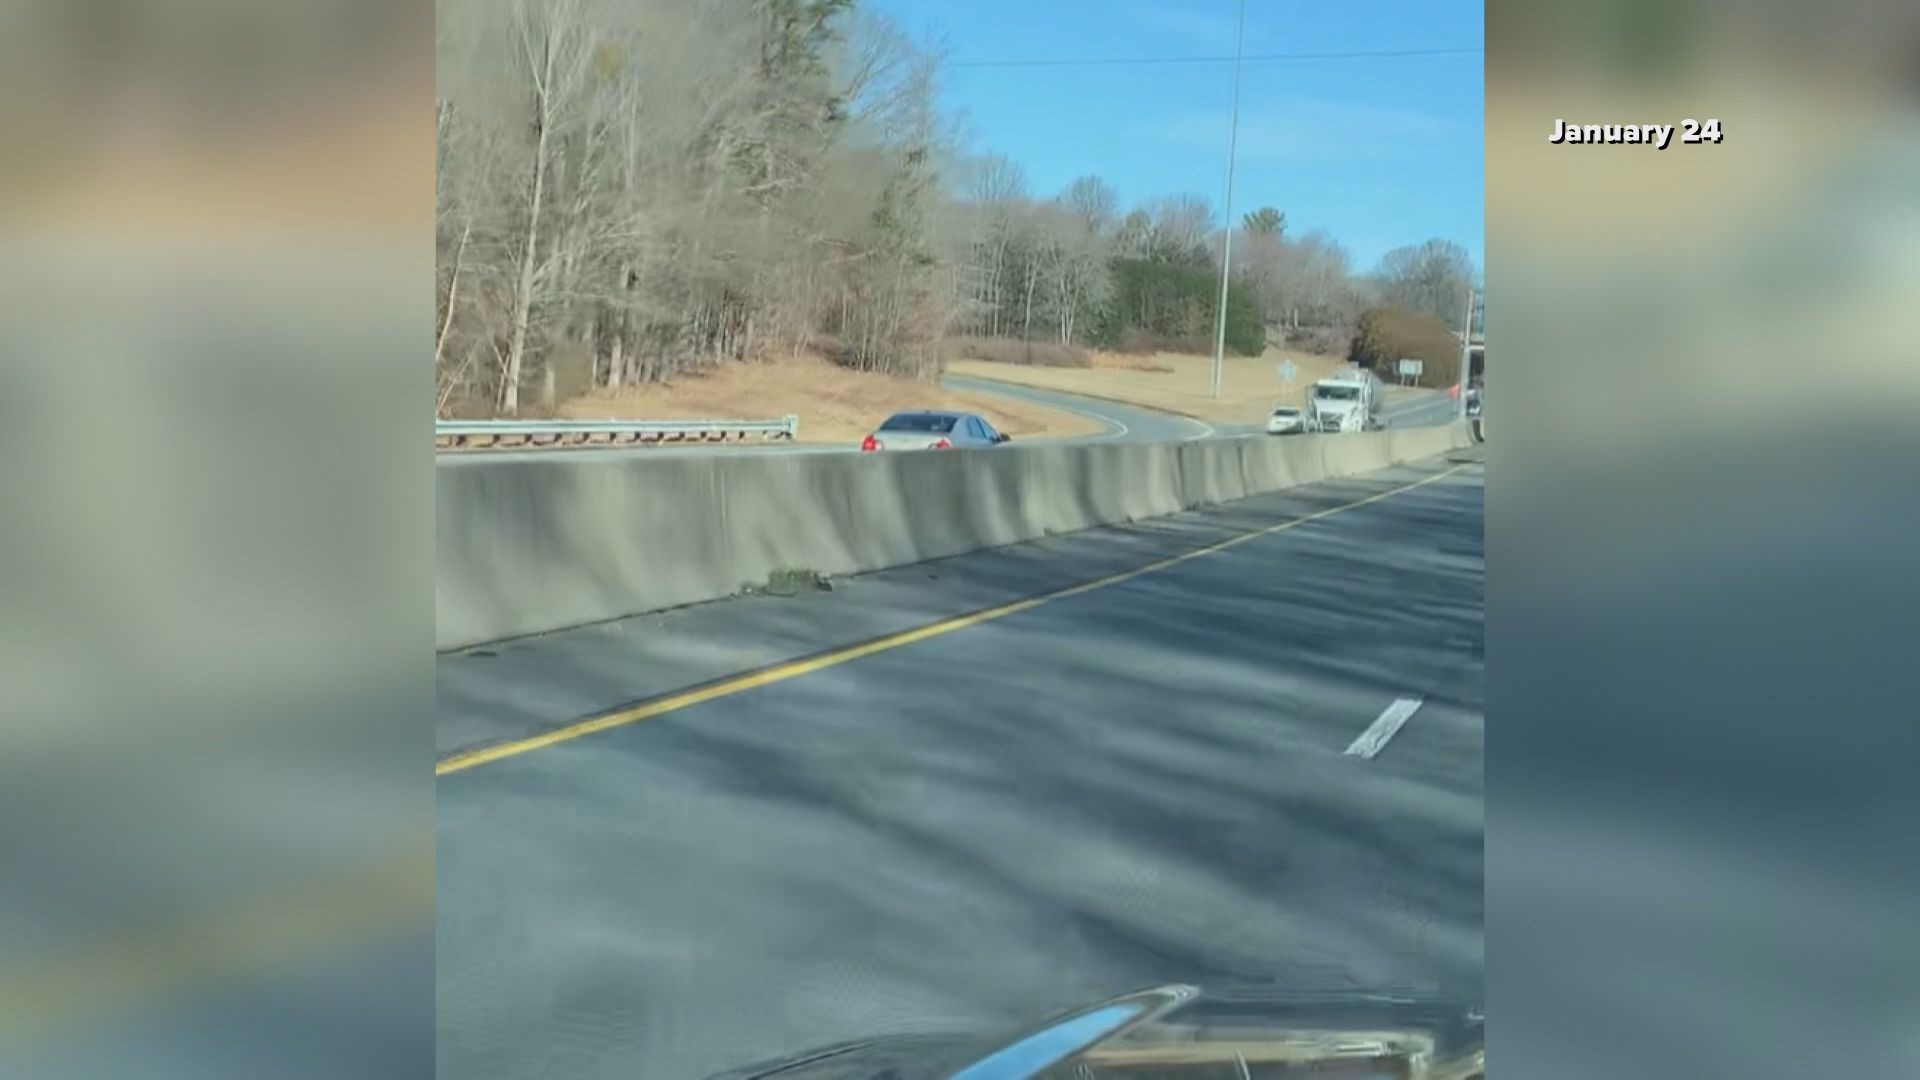 On Jan. 24, a viewer shared a video of a wrong-way driver on I-73 in Asheboro, thankfully there was no crash. One week later, a 94-year-old man died in a wrong-way c